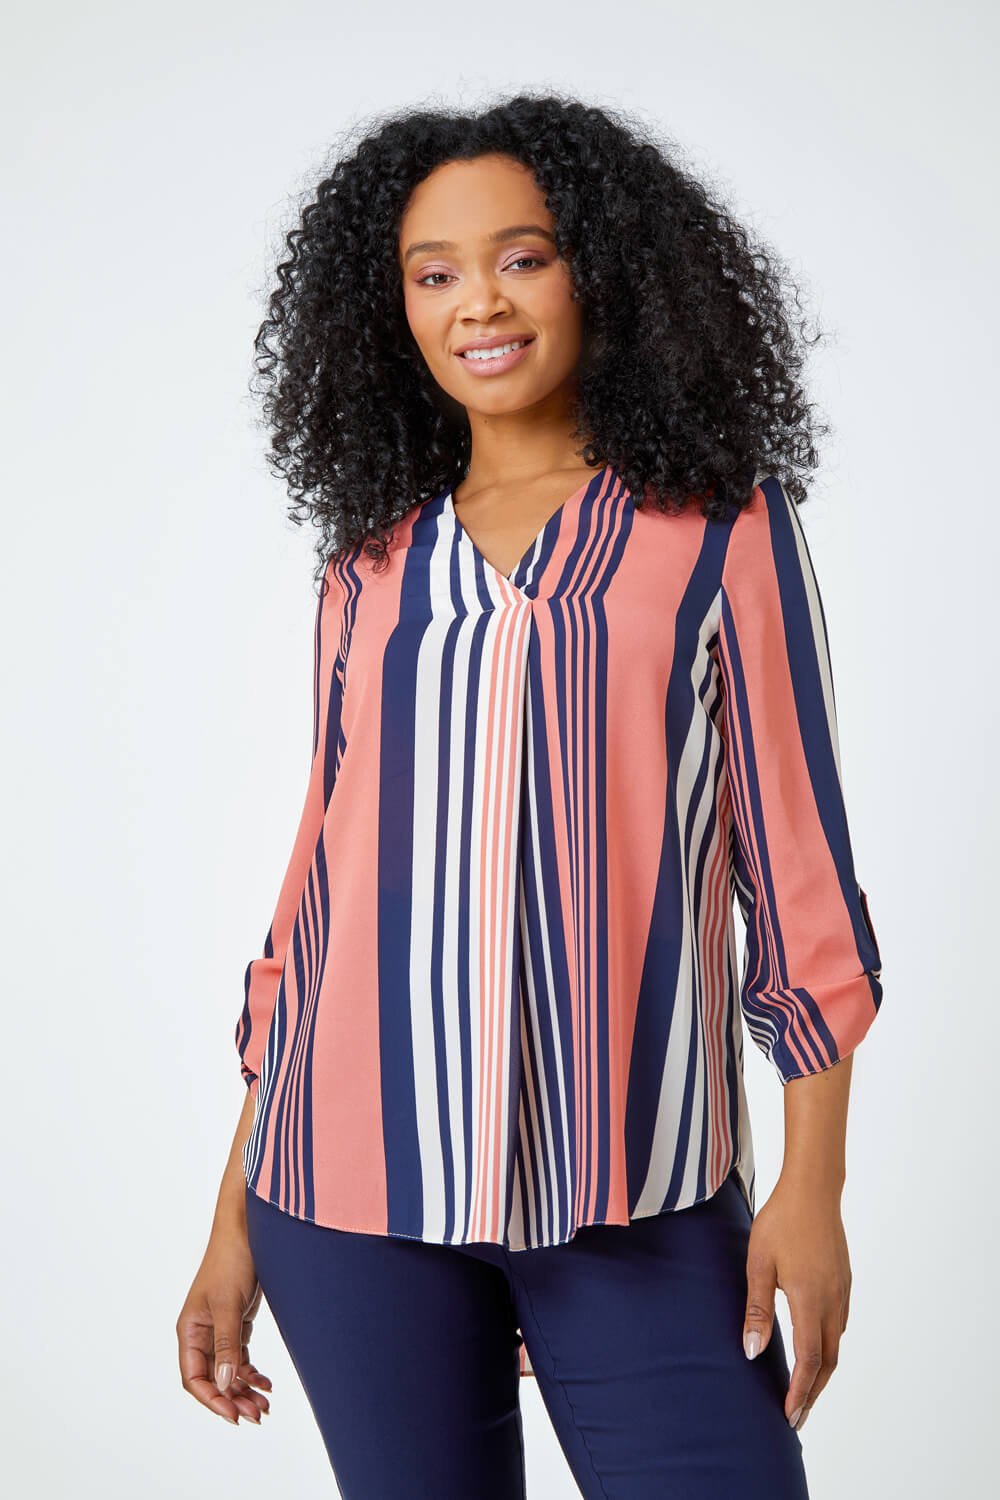 CORAL Petite Pleat Front Stripe Top, Image 5 of 5